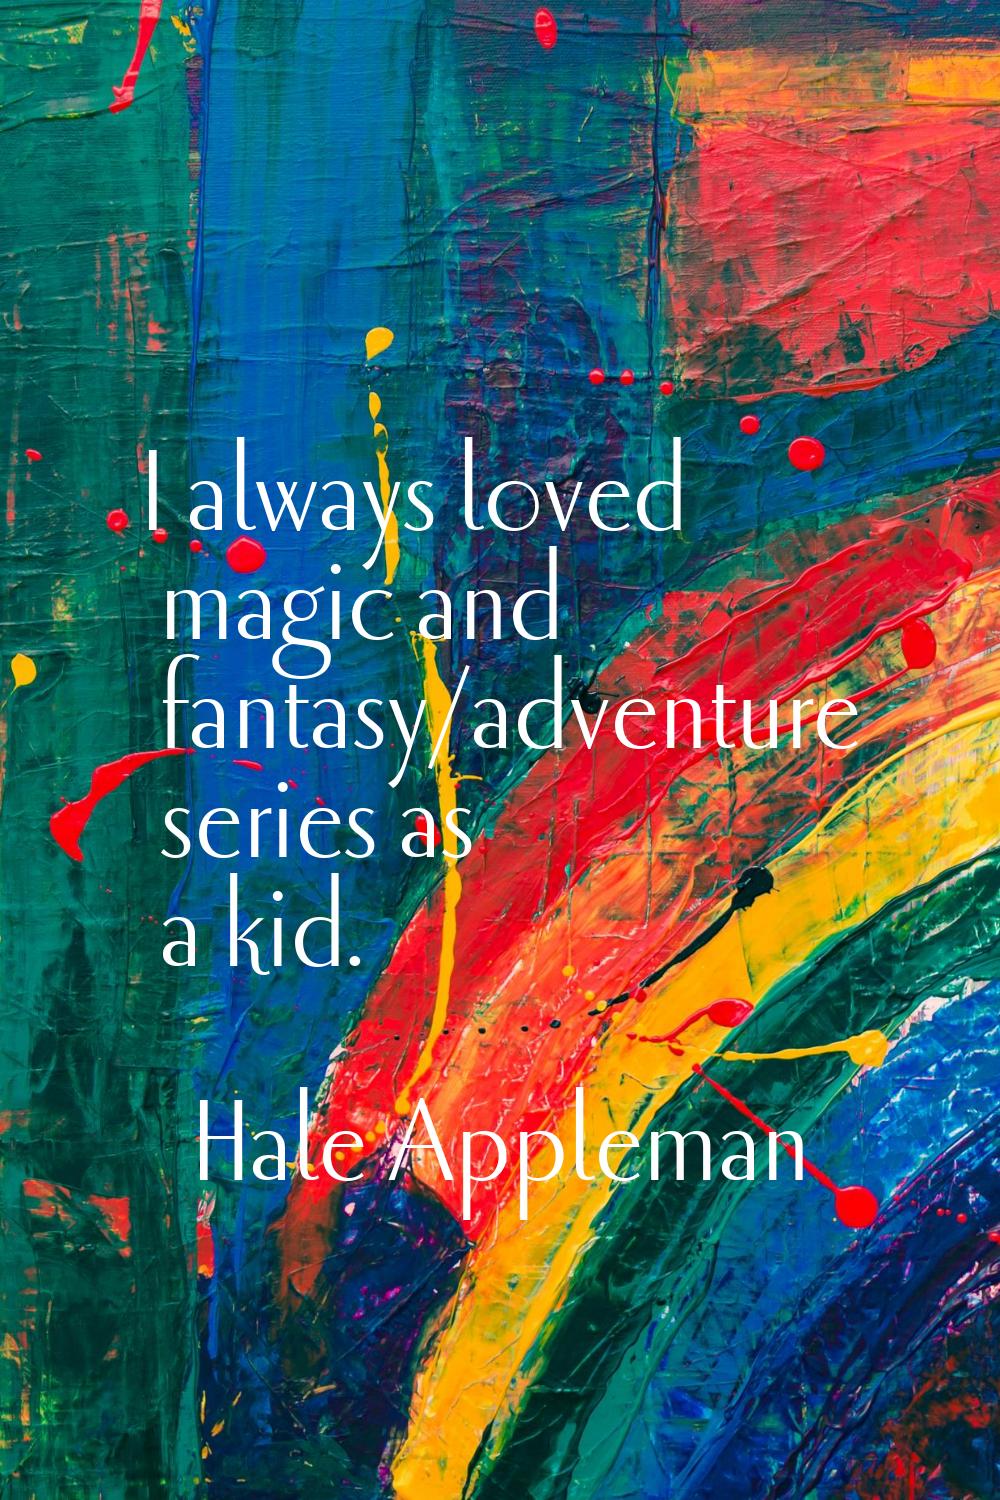 I always loved magic and fantasy/adventure series as a kid.